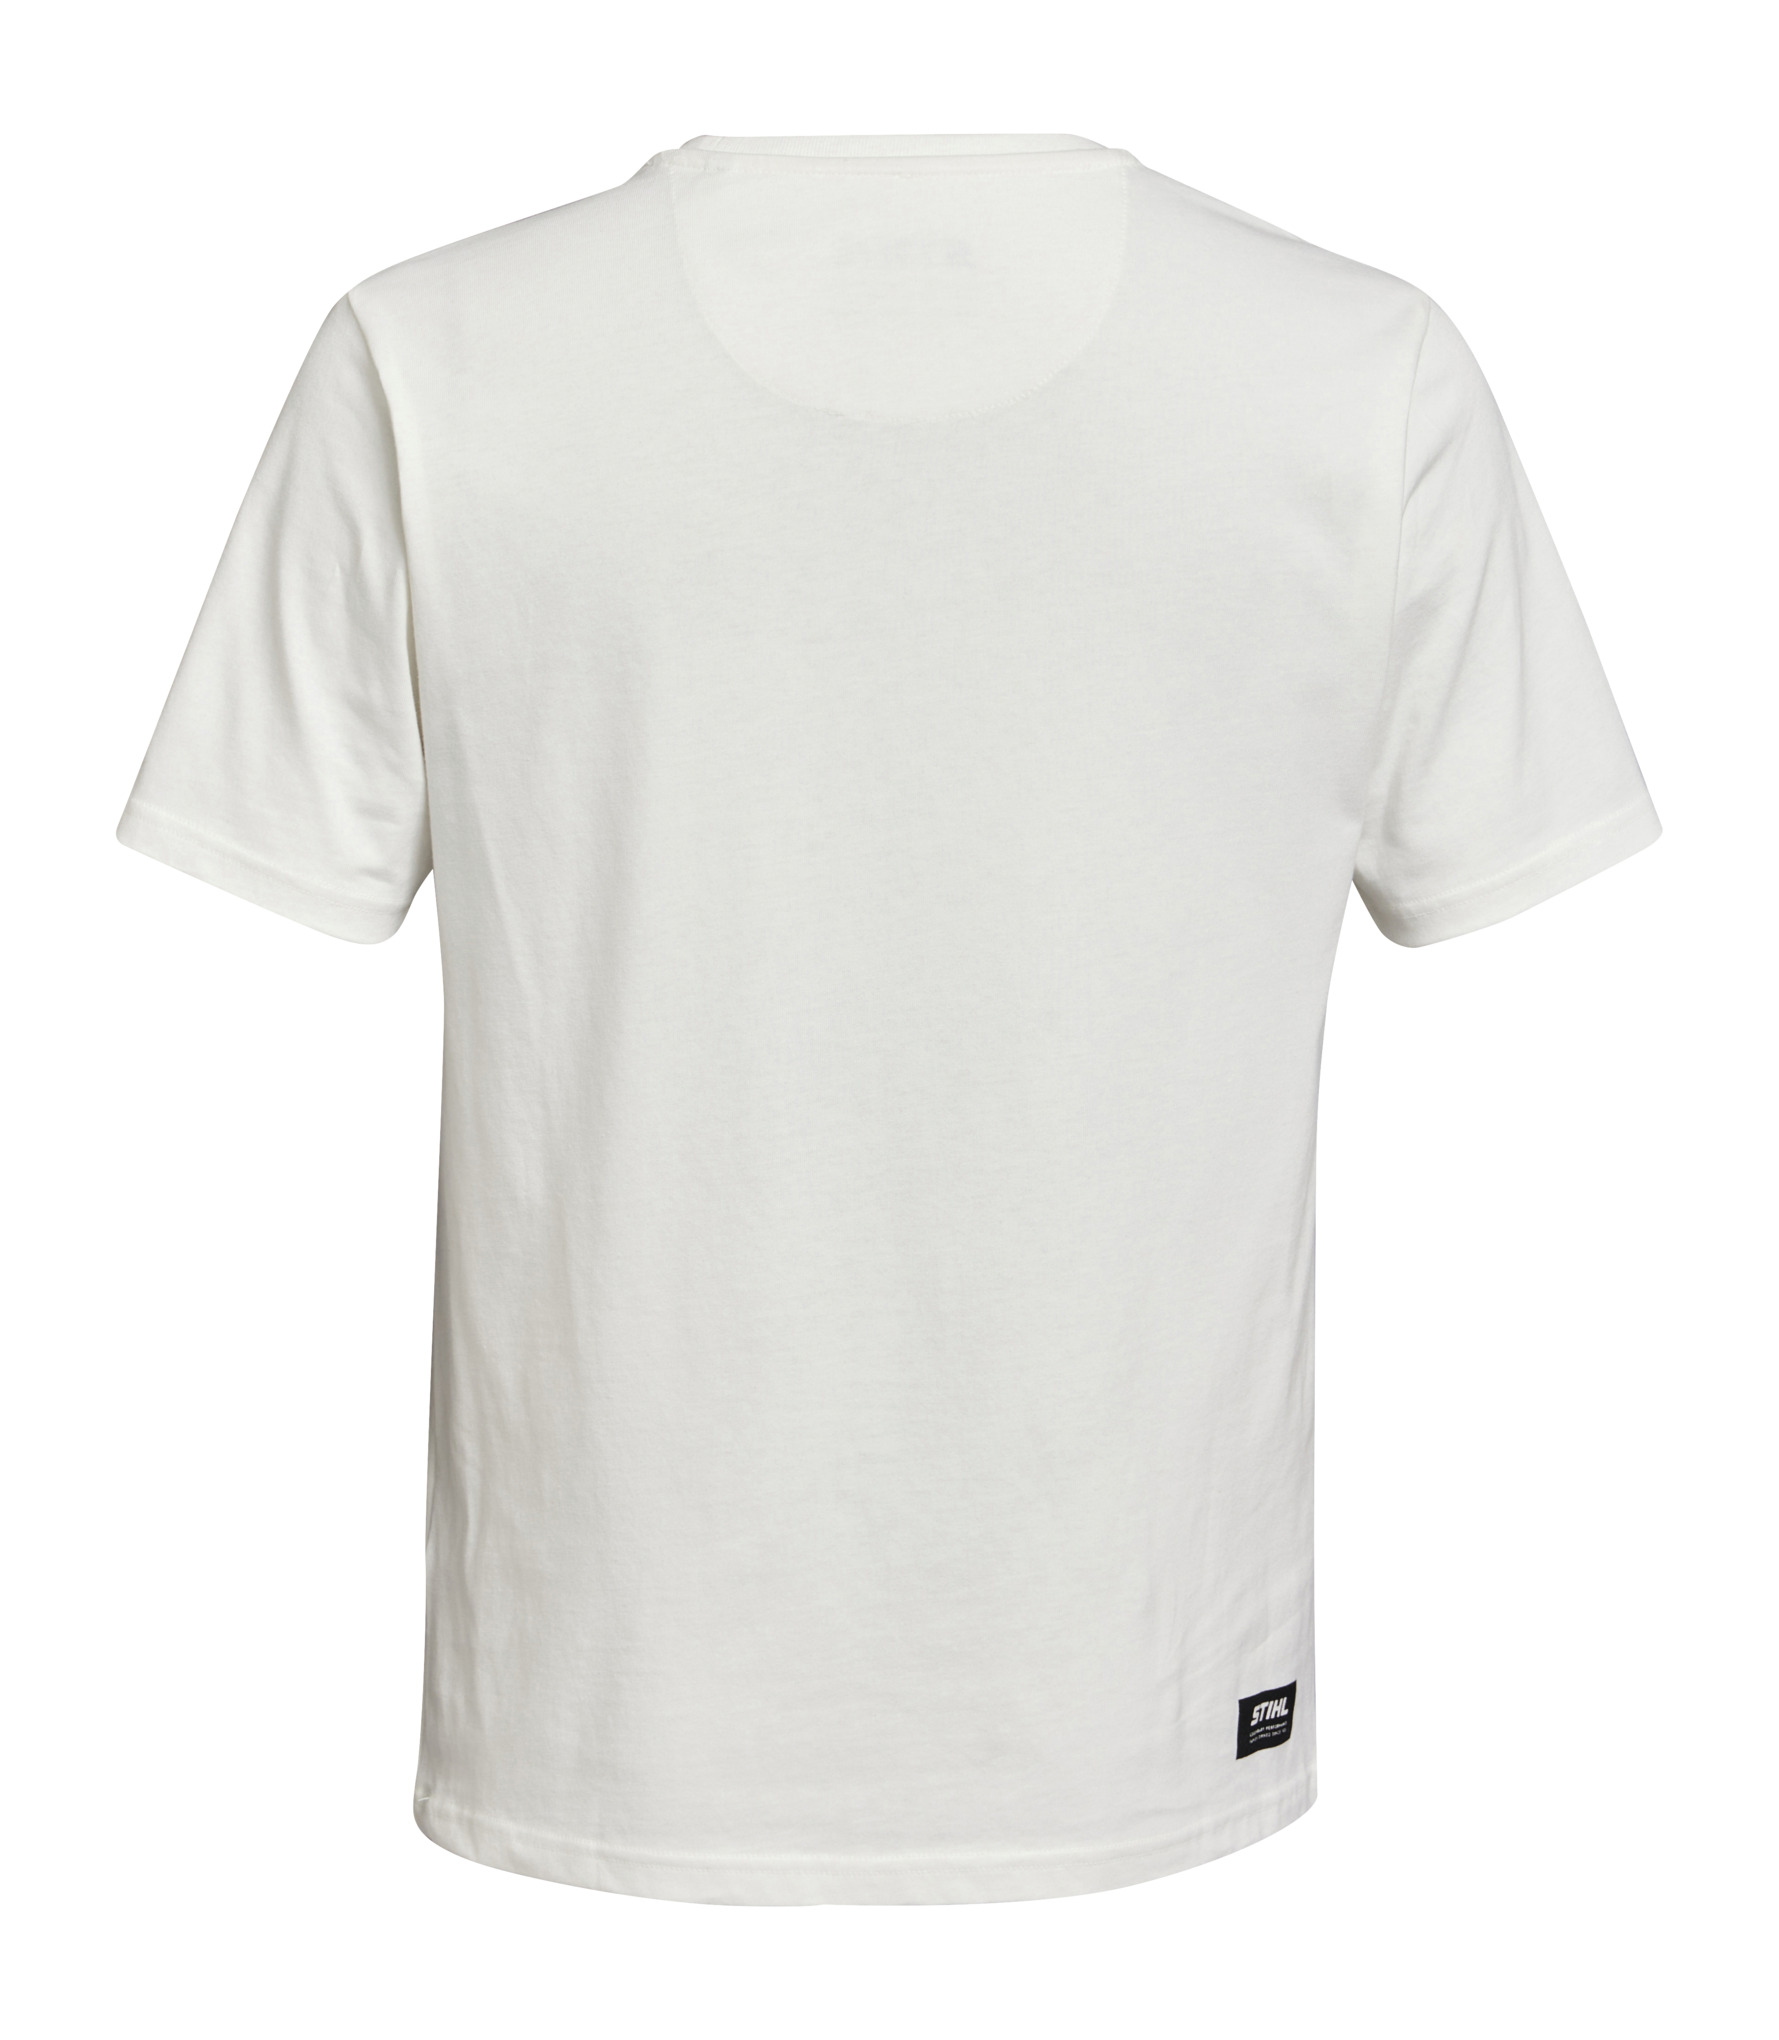 T-Shirt SUSTAINABLE ICON Branca, Compre online